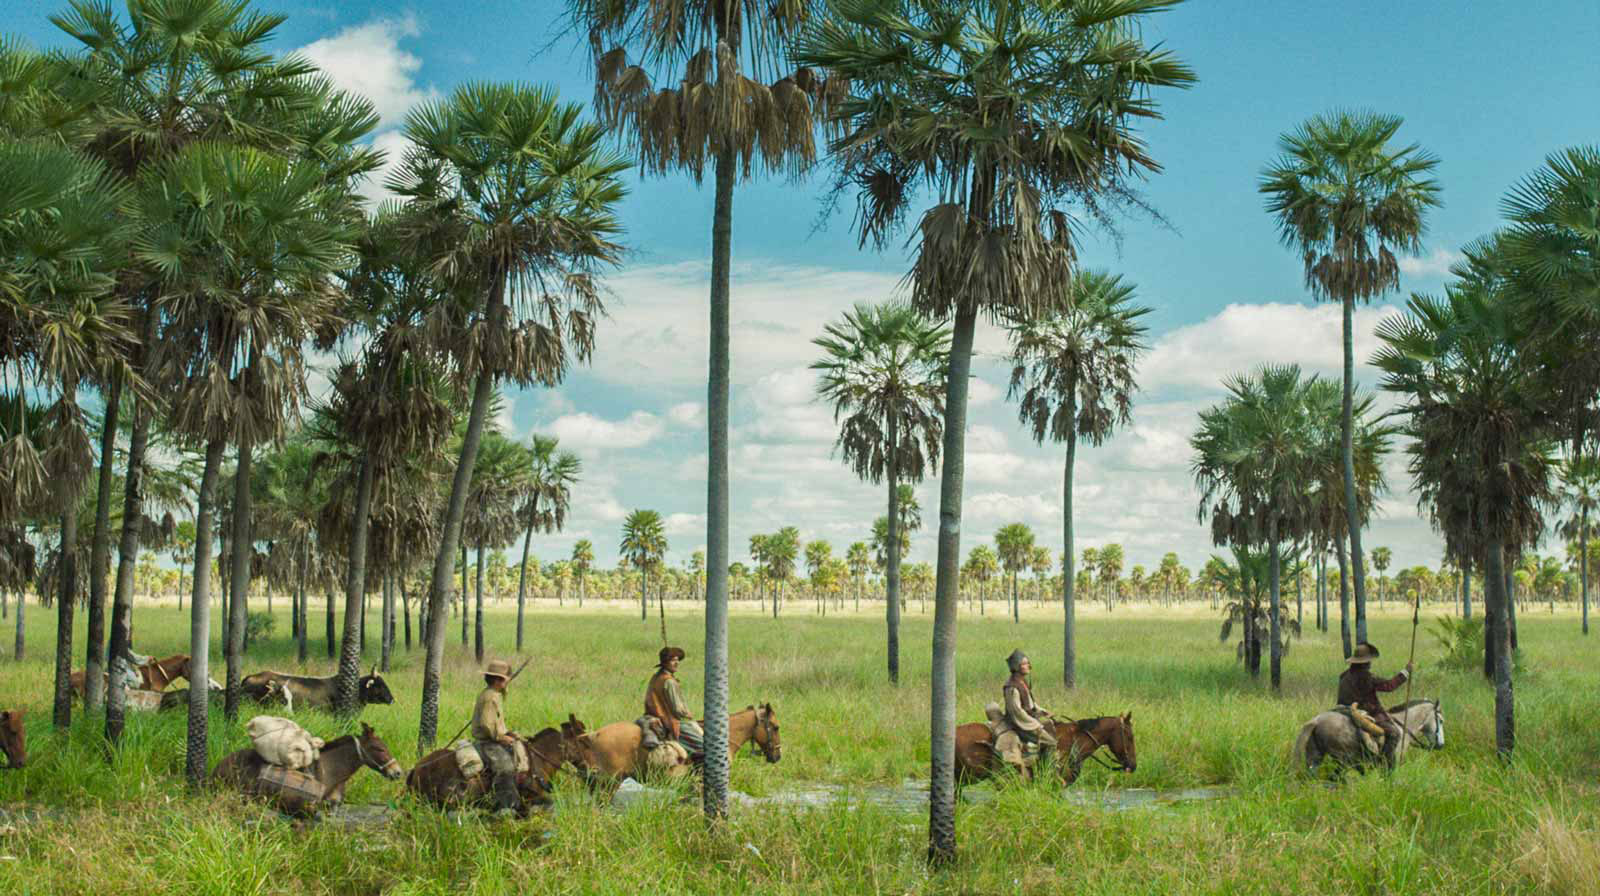 a scene of south american grasslands with four riders on horses among palm trees. 